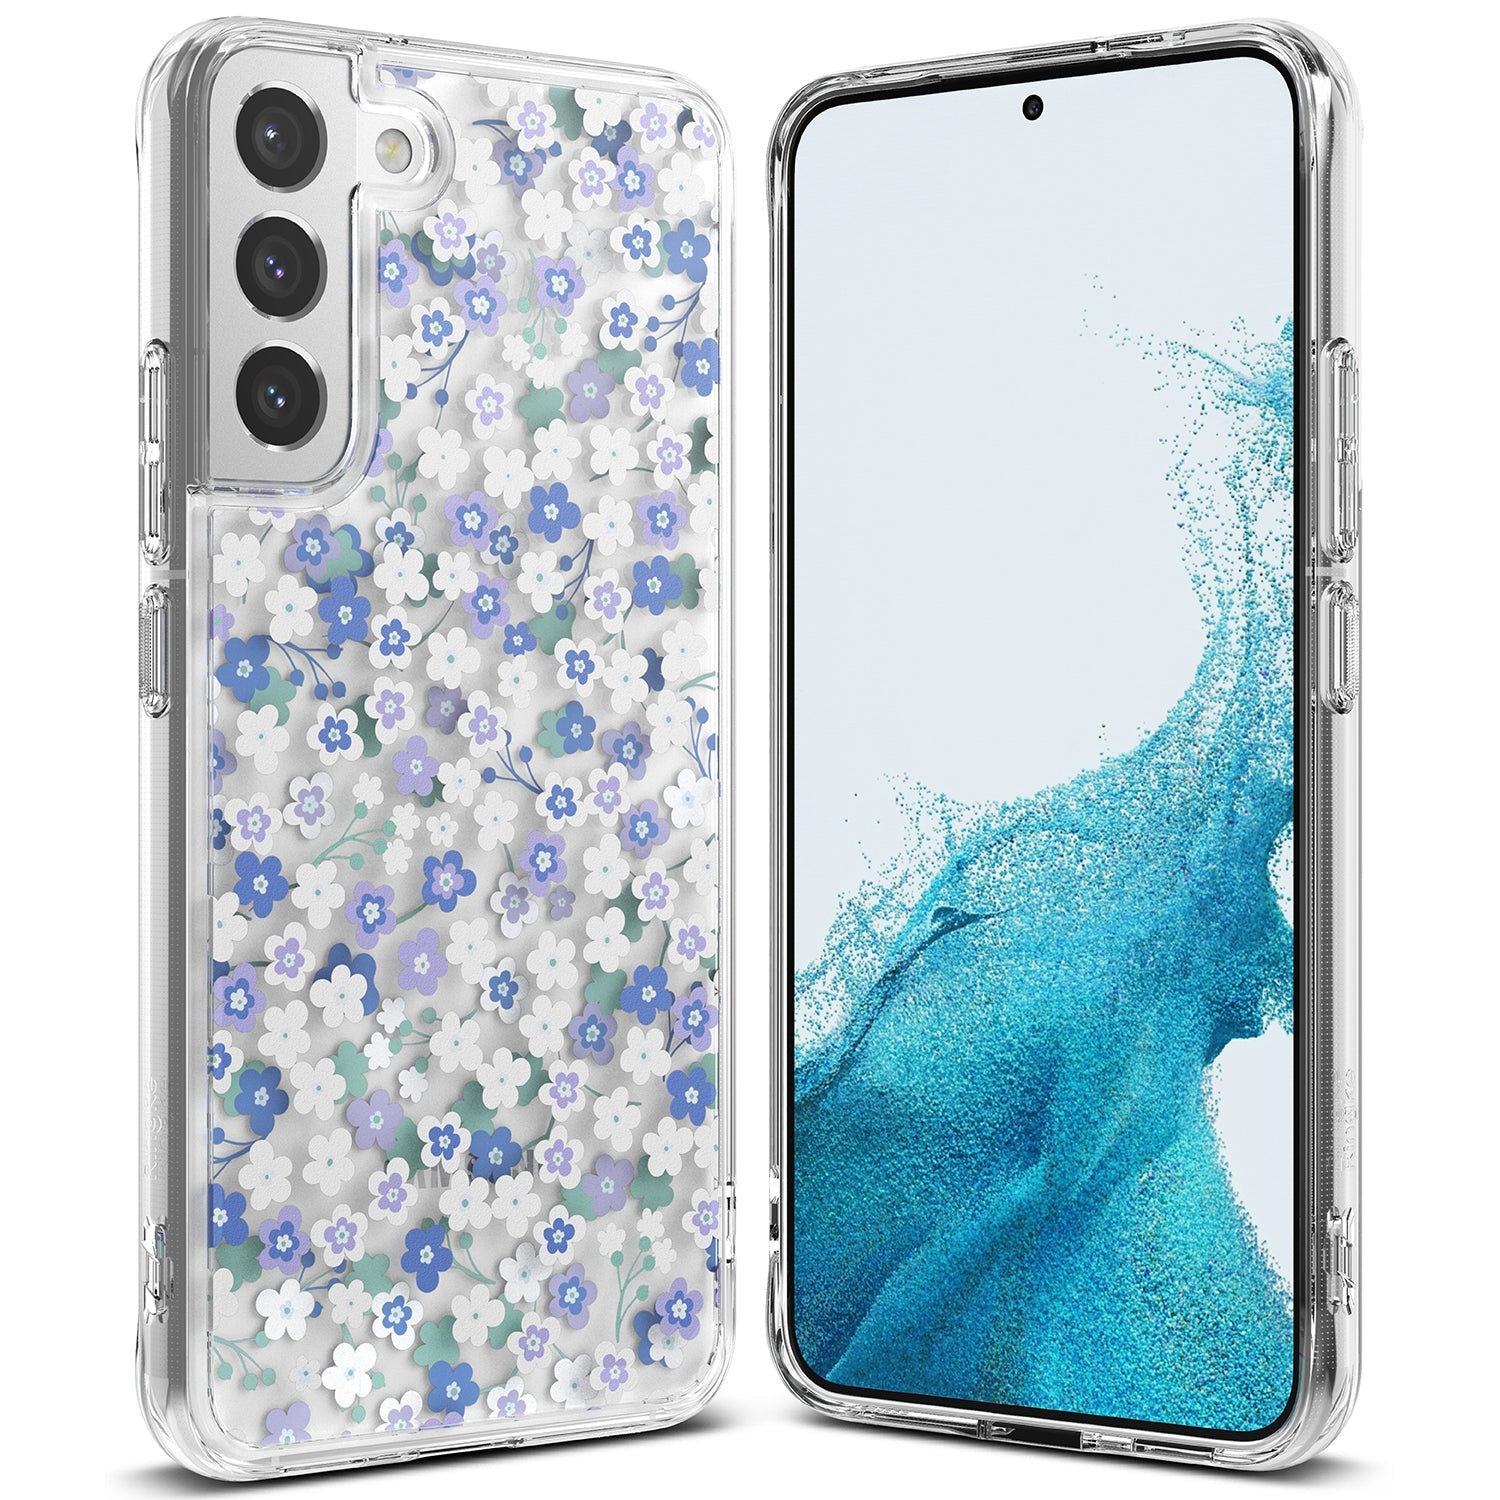 Ringke Fusion Design Case for Samsung Galaxy S22 Default RINGKE WILD FLOWERS 